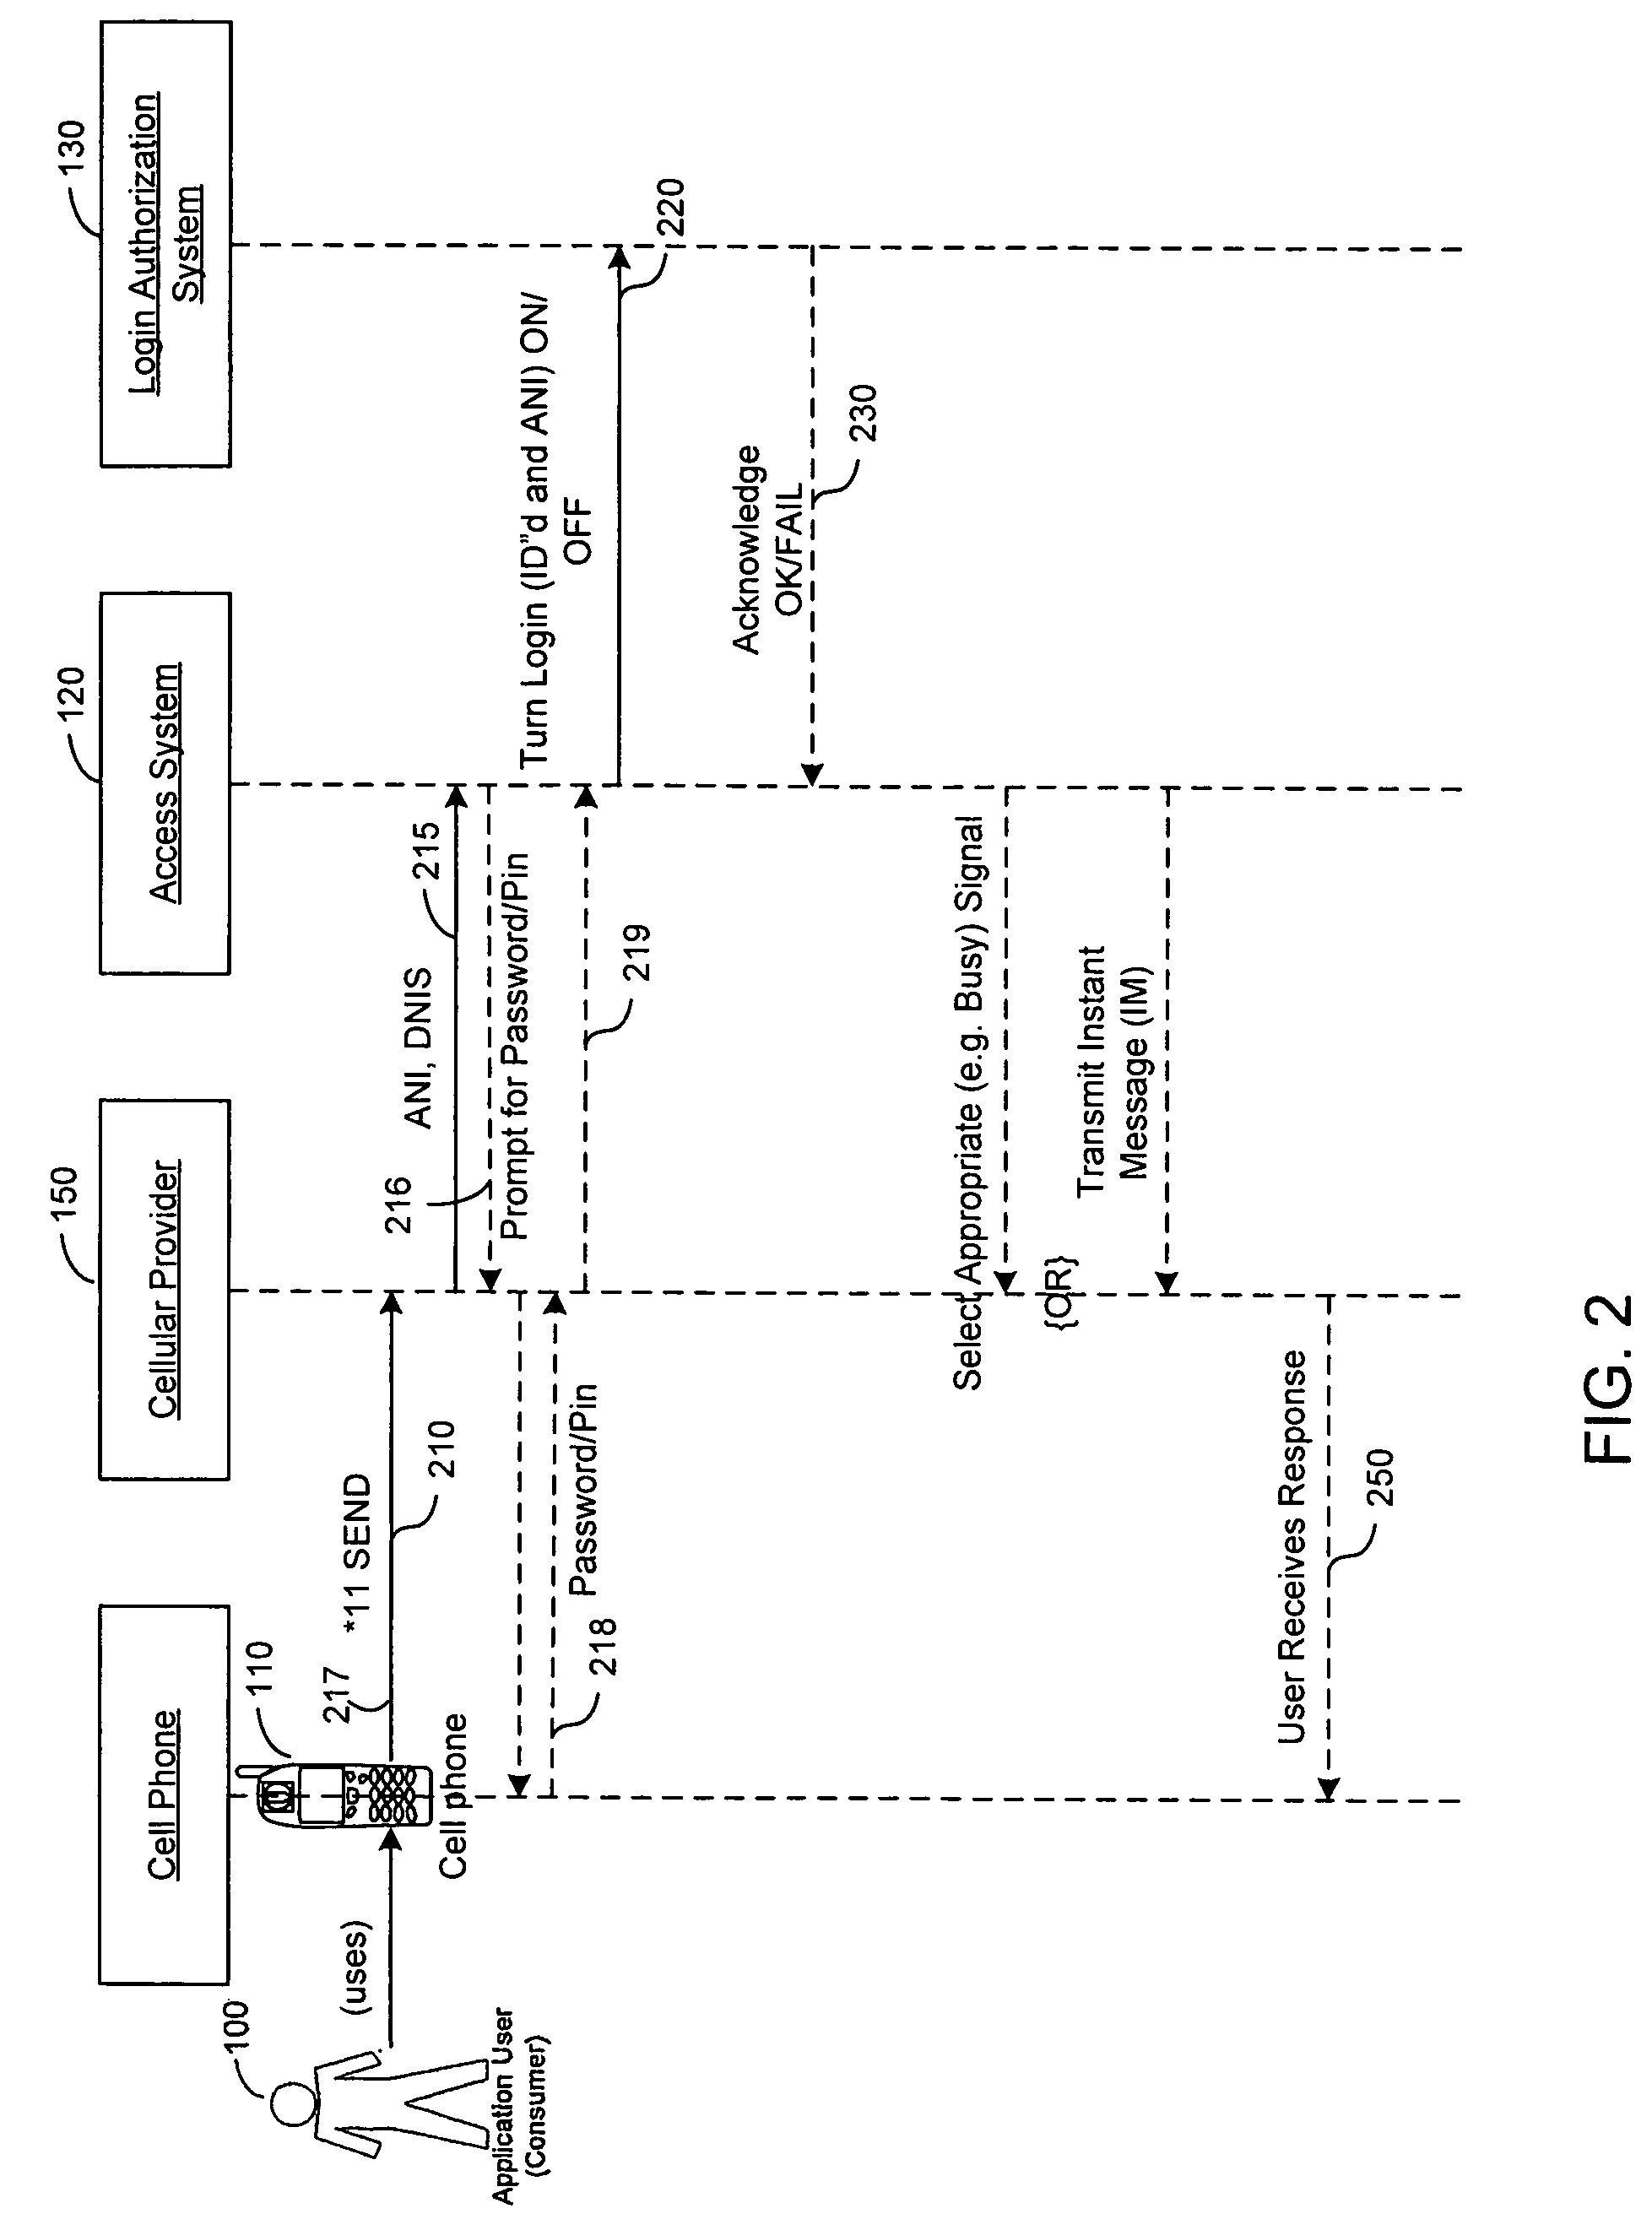 Systems and methods for user interface control